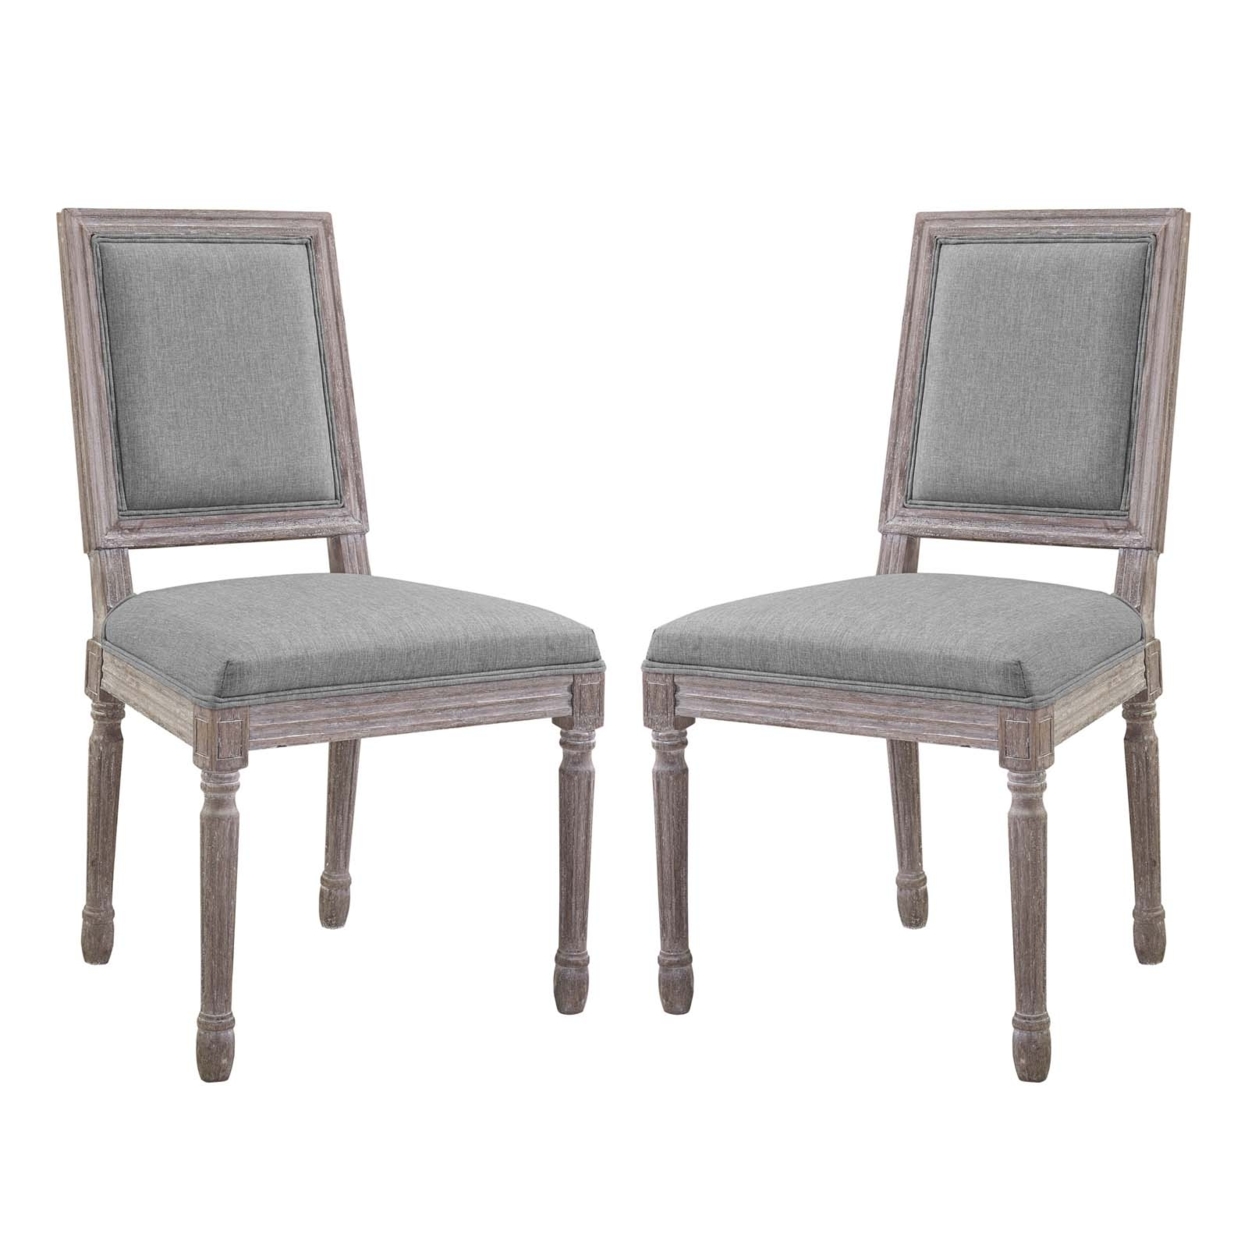 Court Dining Side Chair Upholstered Fabric Set Of 2,Light Gray